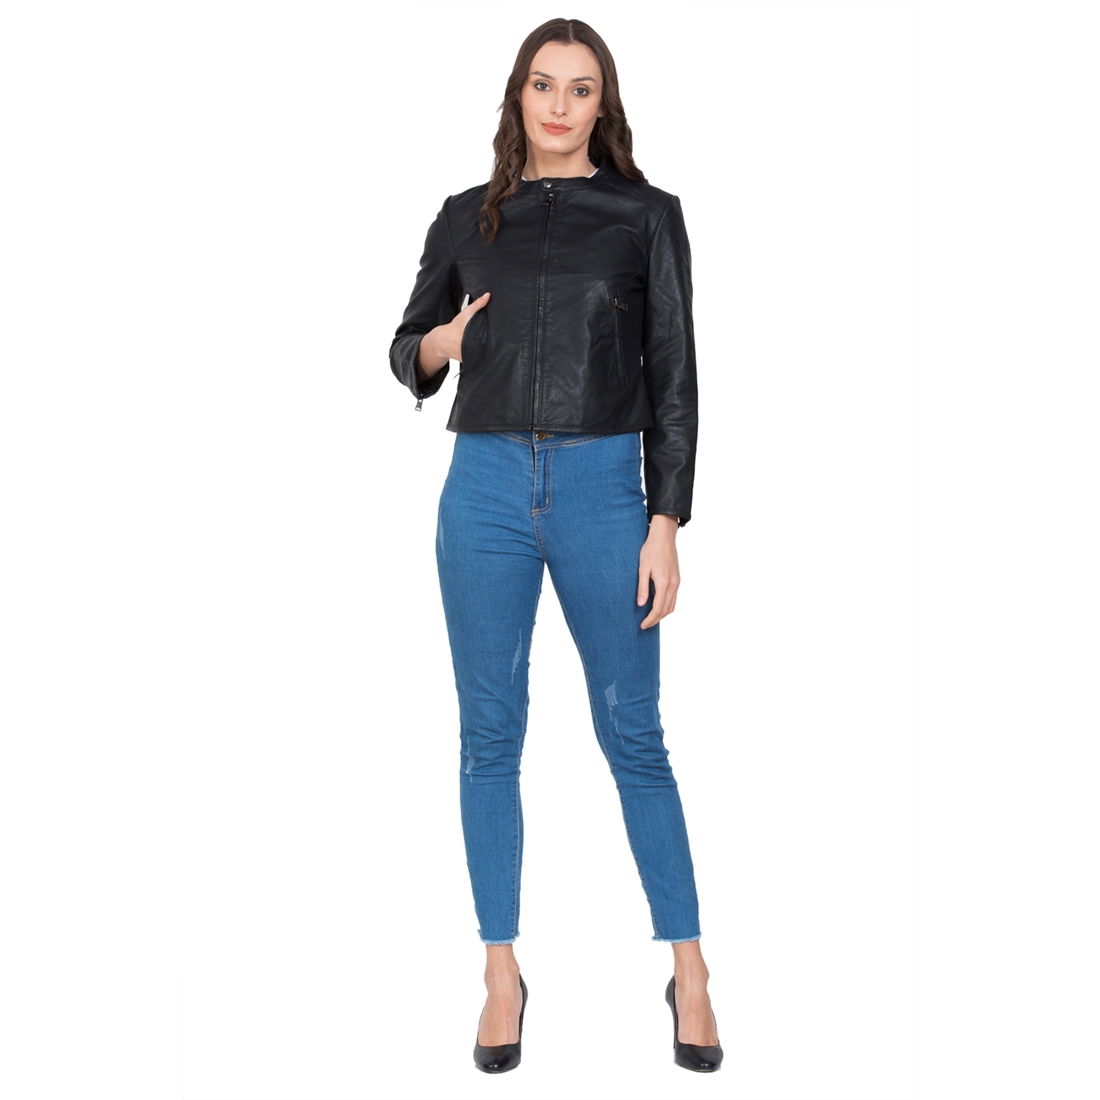 Justanned | JUSTANNED CHARCOAL WOMEN LEATHER JACKET 1